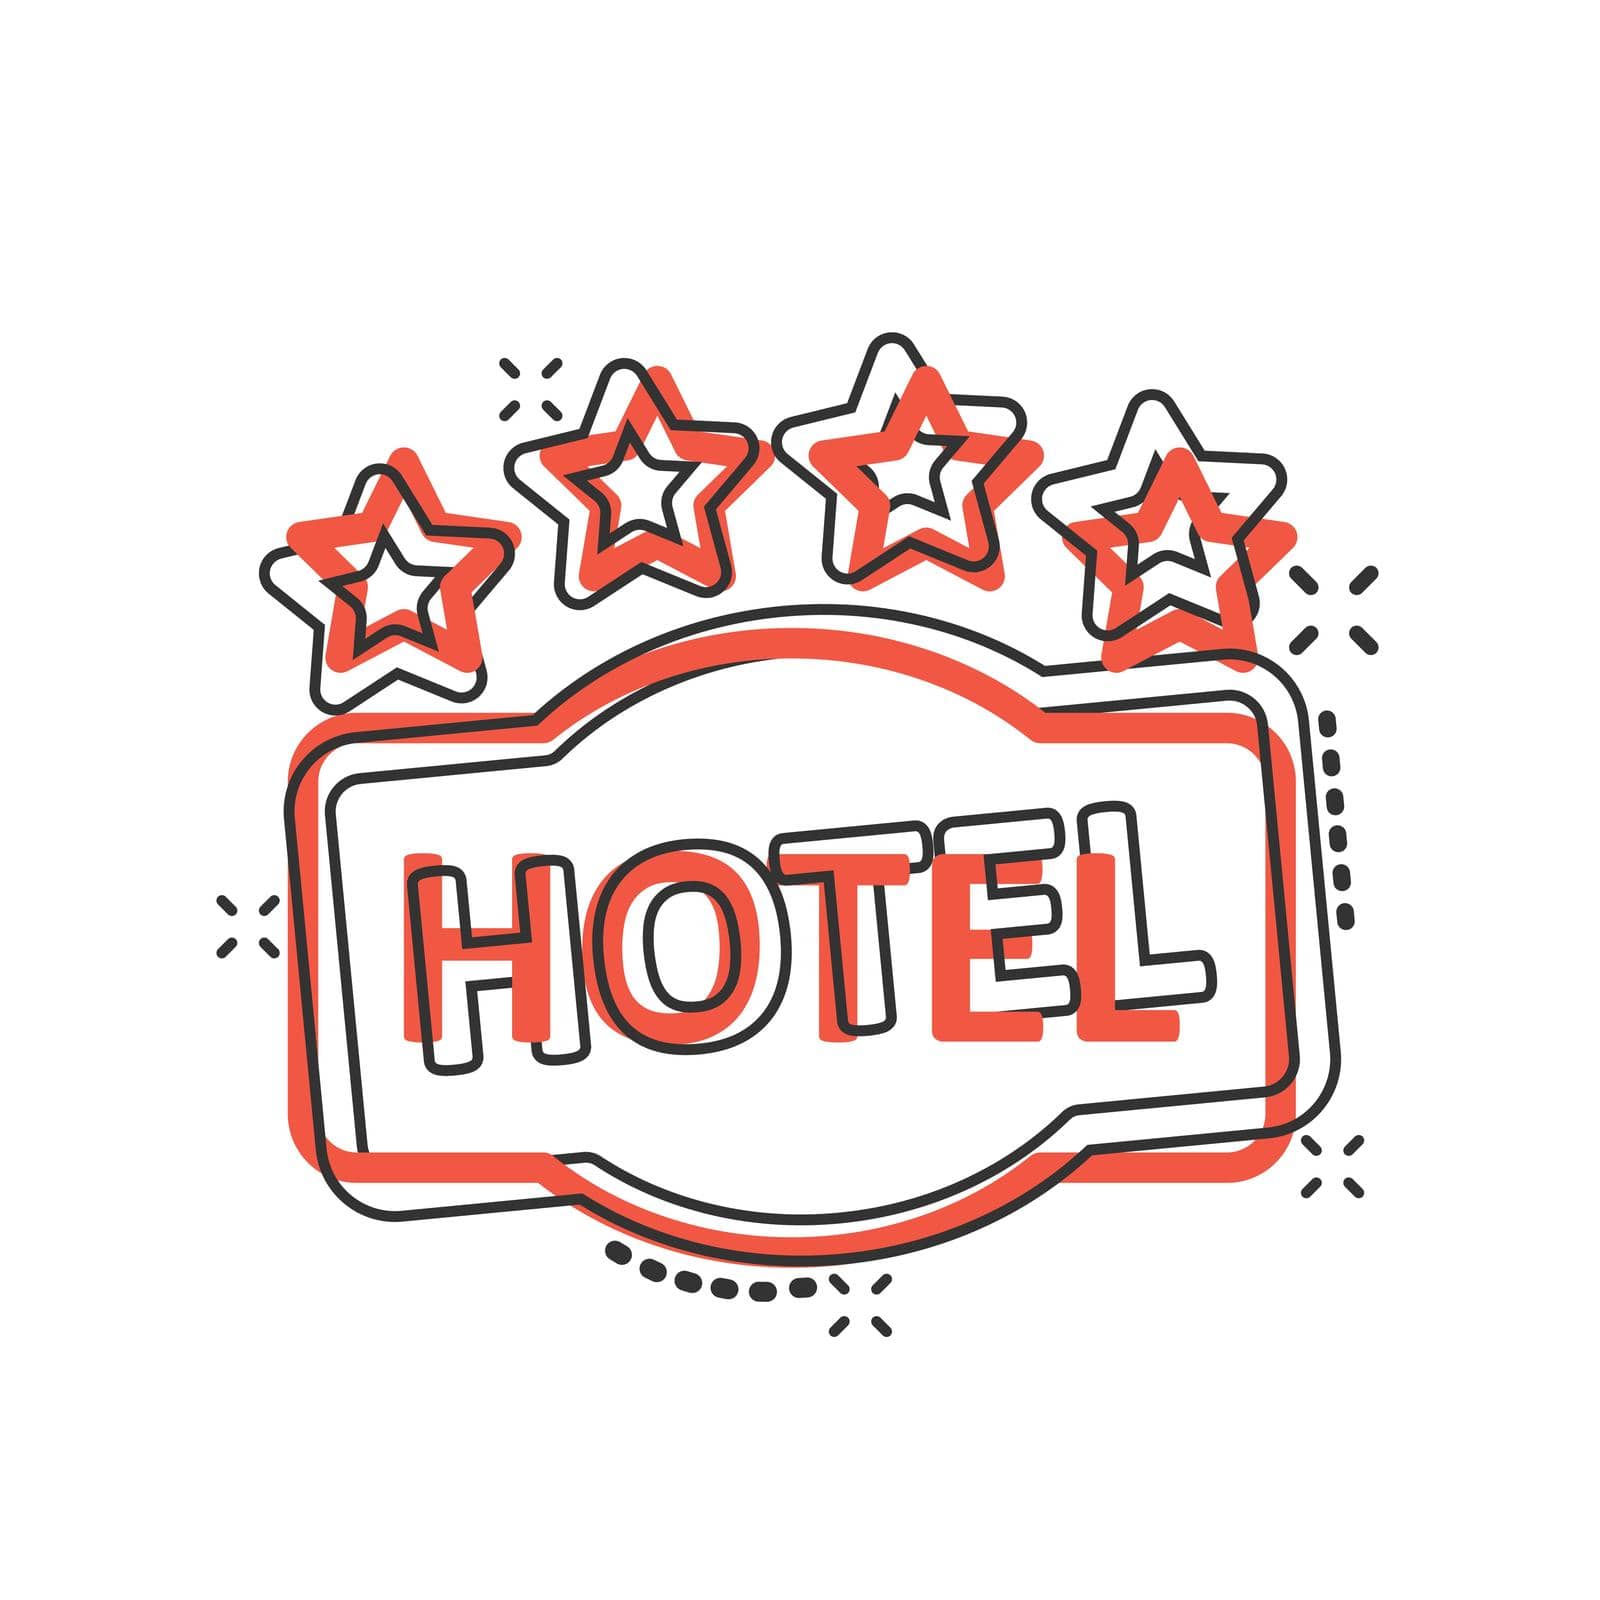 Hotel 4 stars sign icon in comic style. Inn cartoon vector illustration on white isolated background. Hostel room information splash effect business concept.